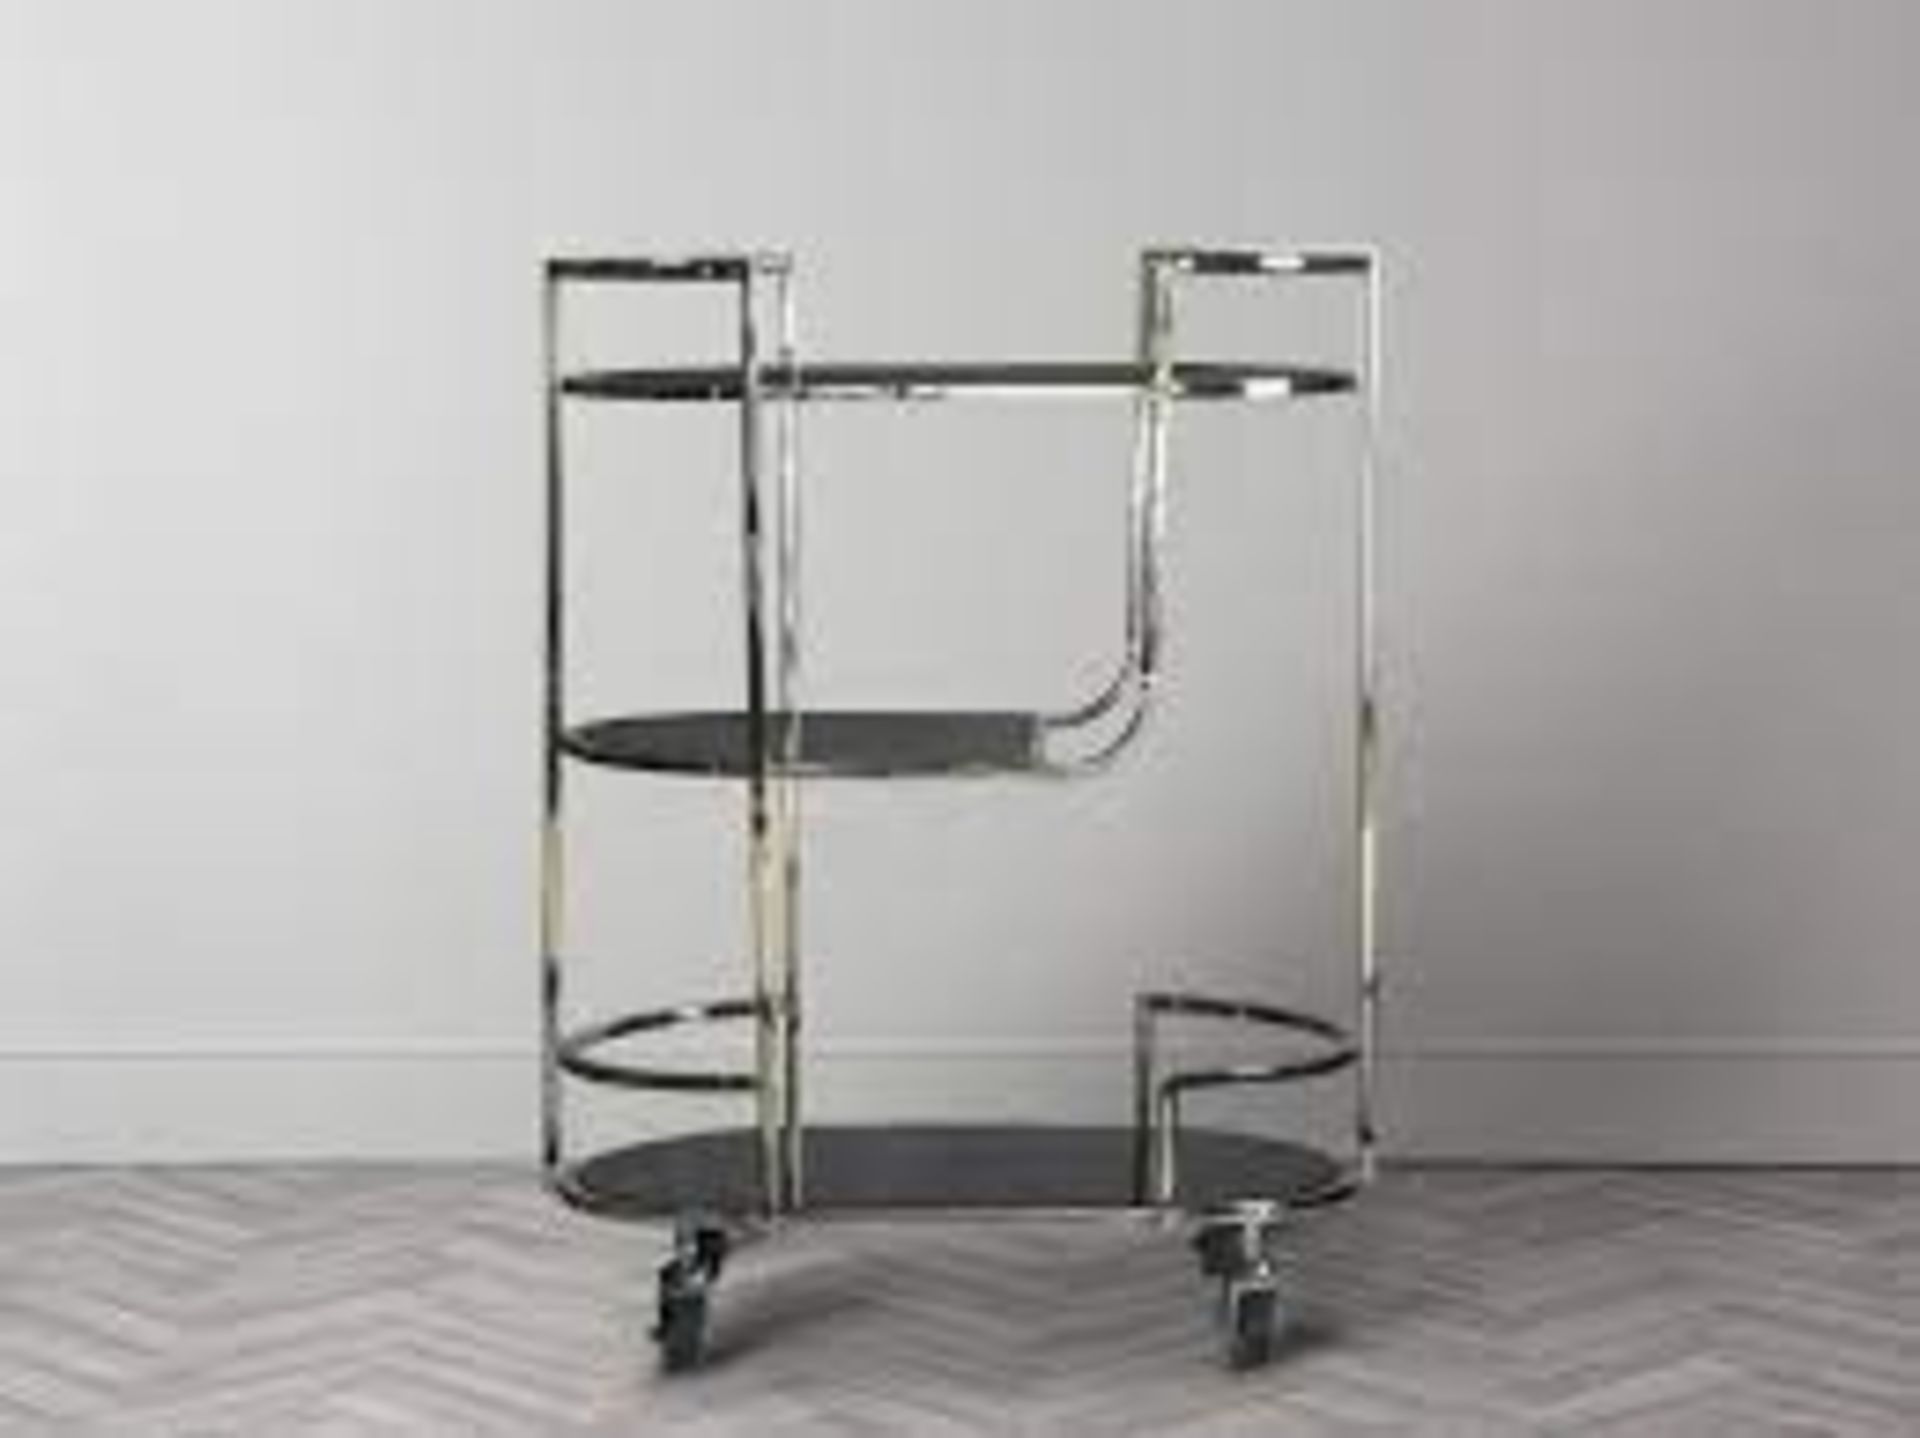 RRP £350 Like New Mojito Drinks Trolley In Chrome Finish